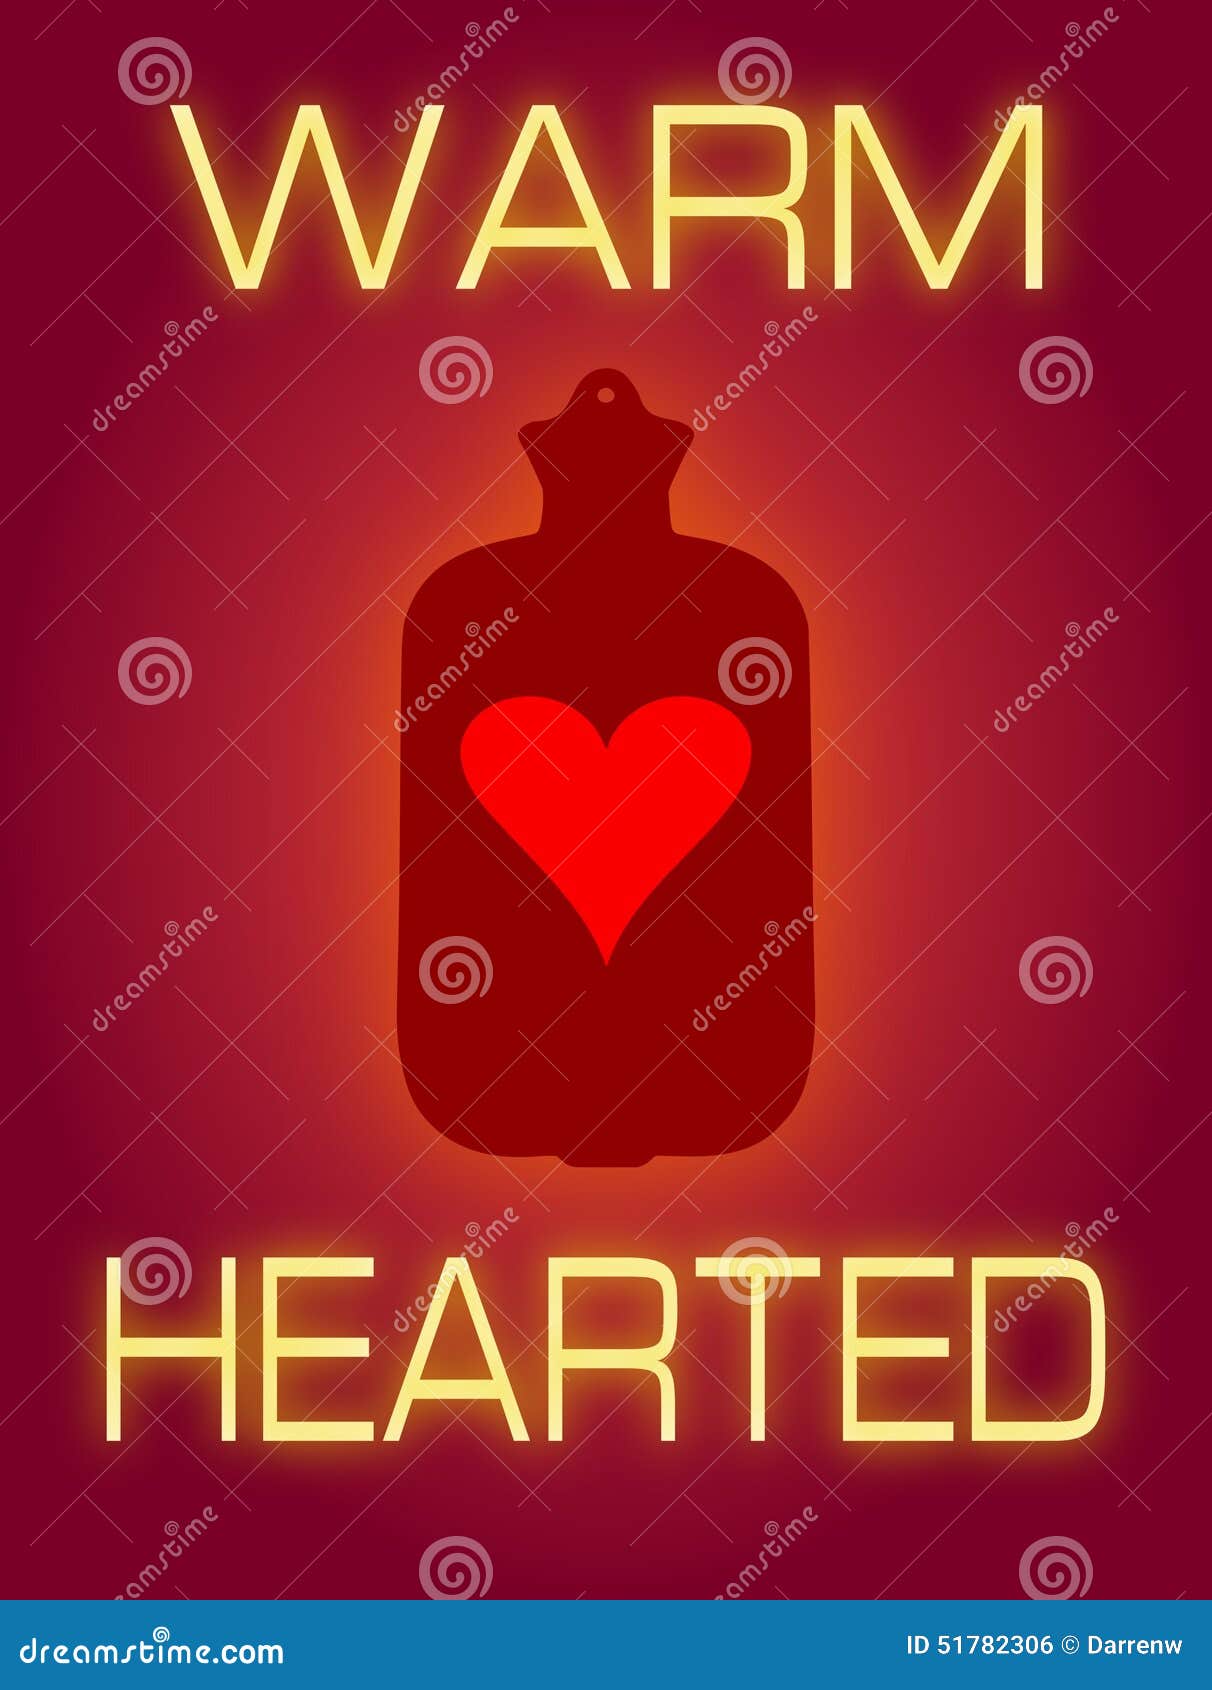 warm hearted